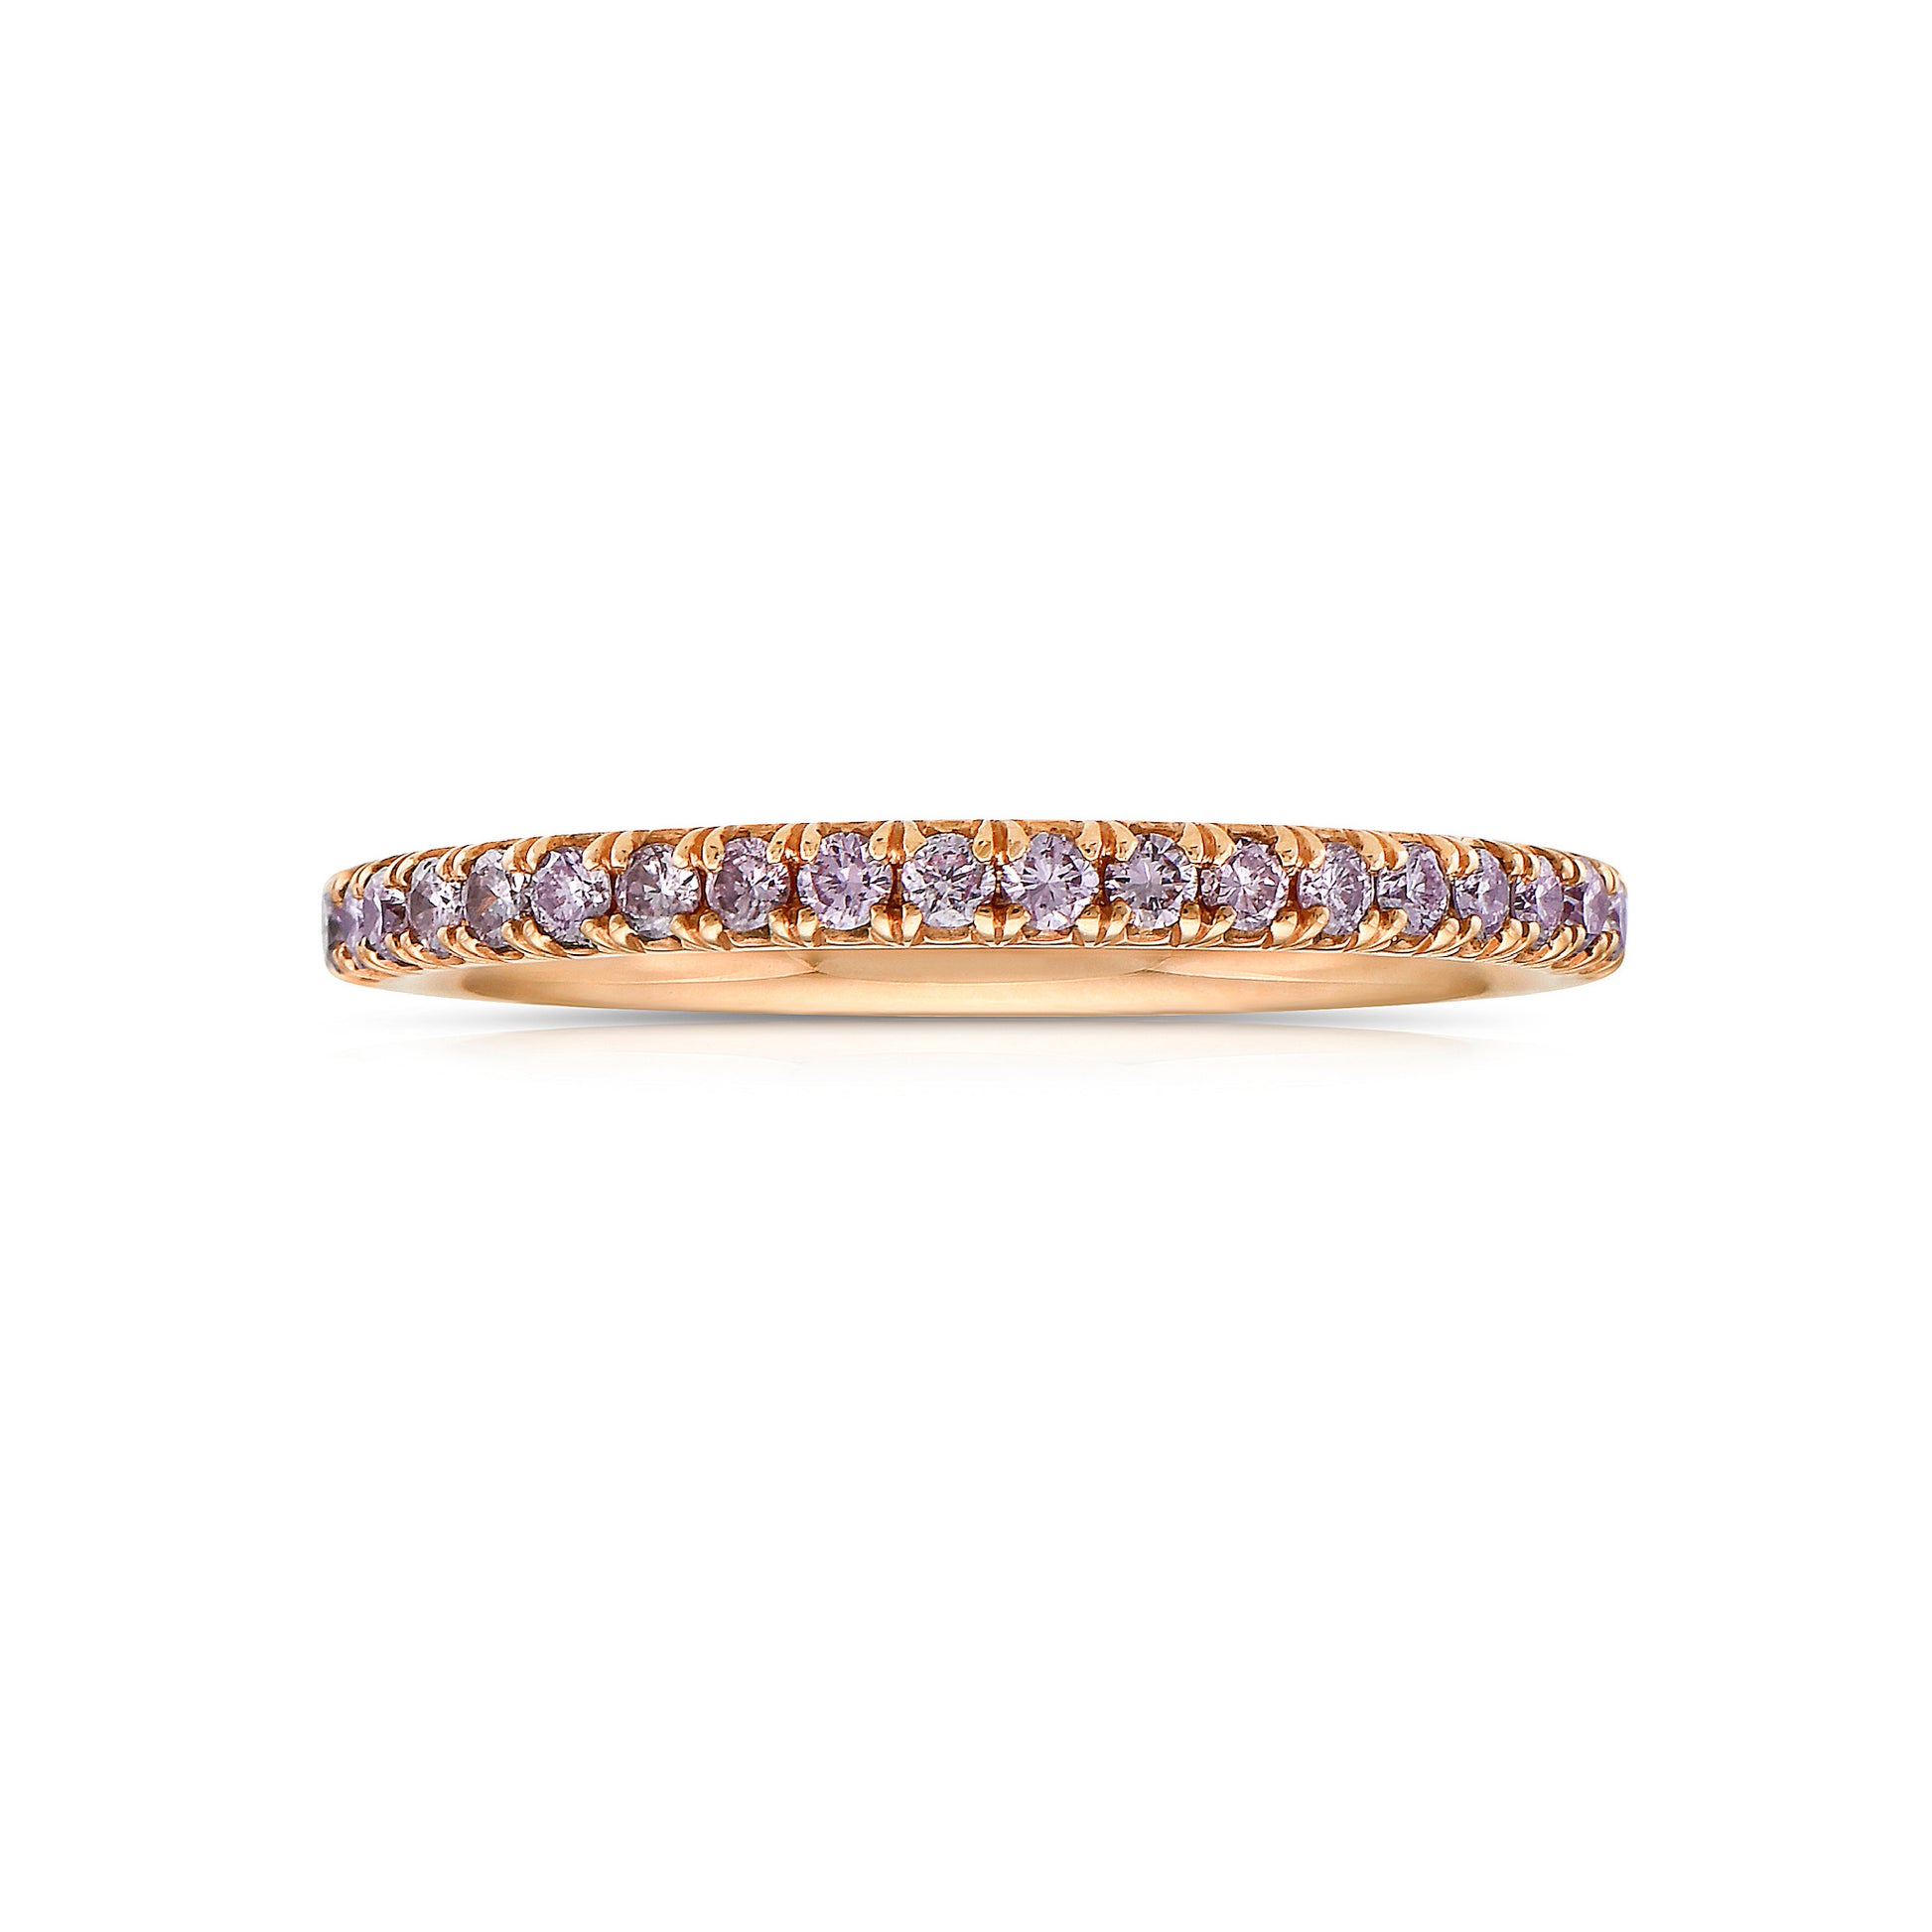 Simple pink diamond eternity ring. Natural pink diamond eternity ring. Delicate pink diamond eternity band. Pink diamond rounds. Natural pink diamonds. Fancy pink diamond round ring.